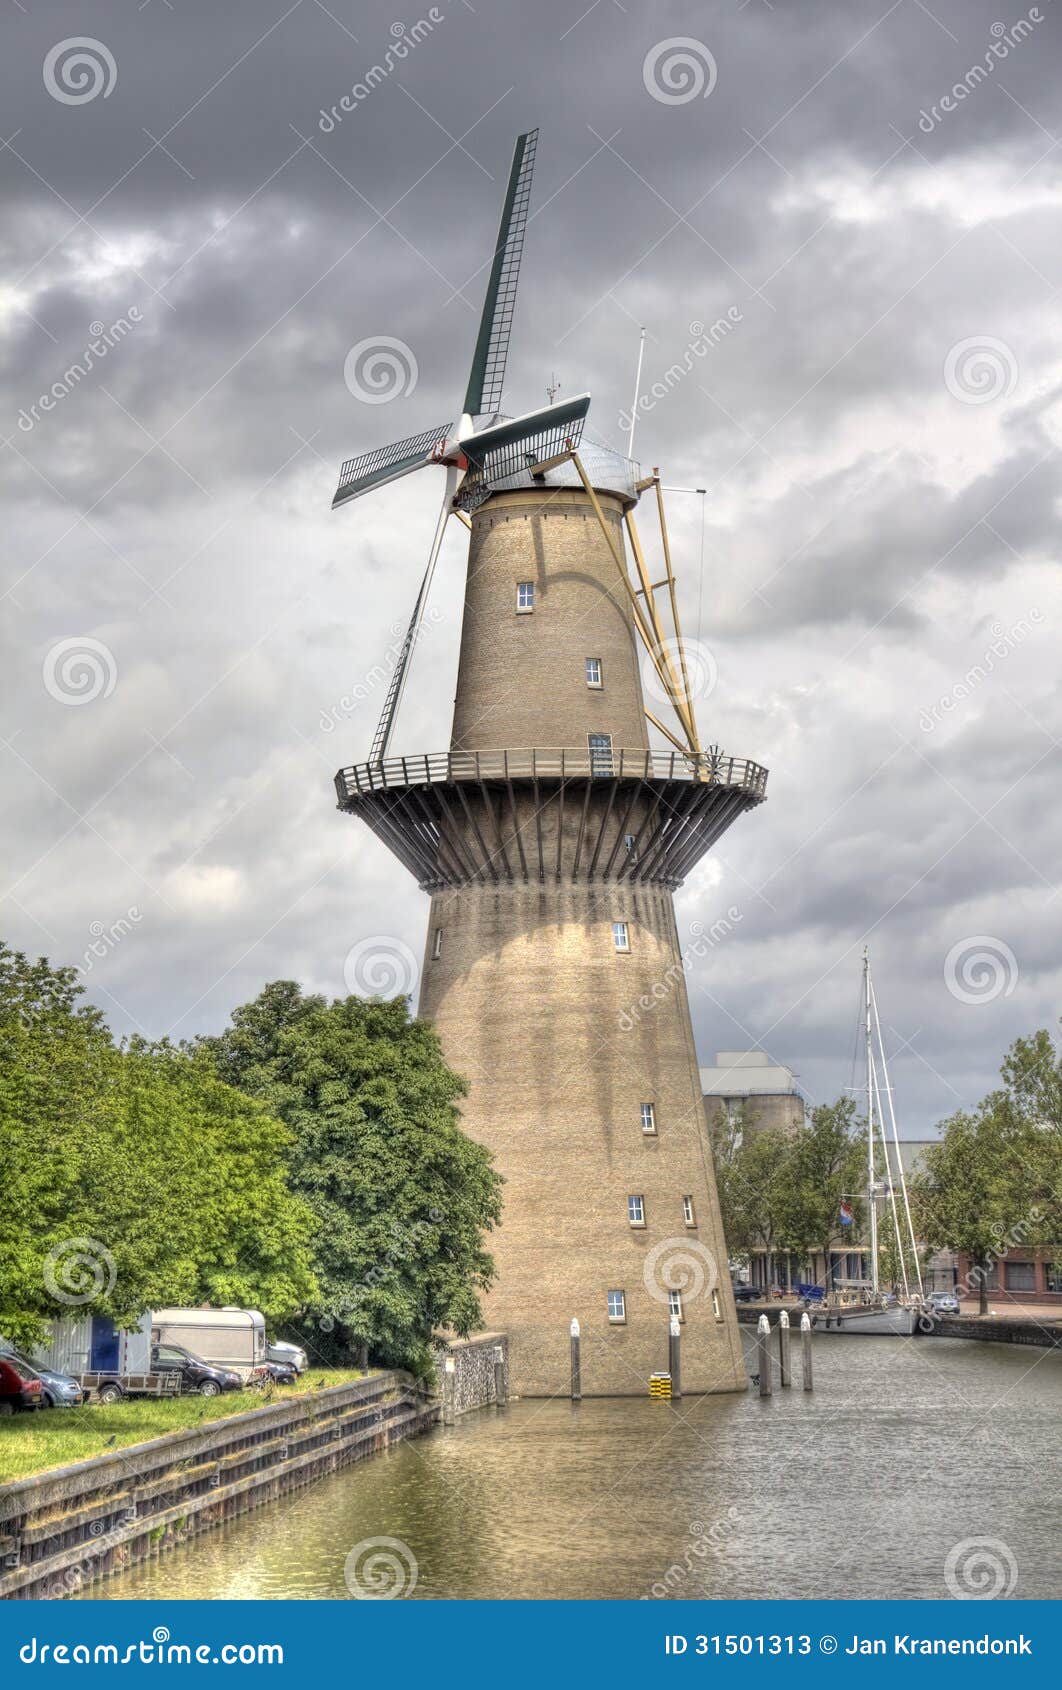 in Schiedam, Holland is a wind turbine producing electricity from wind 